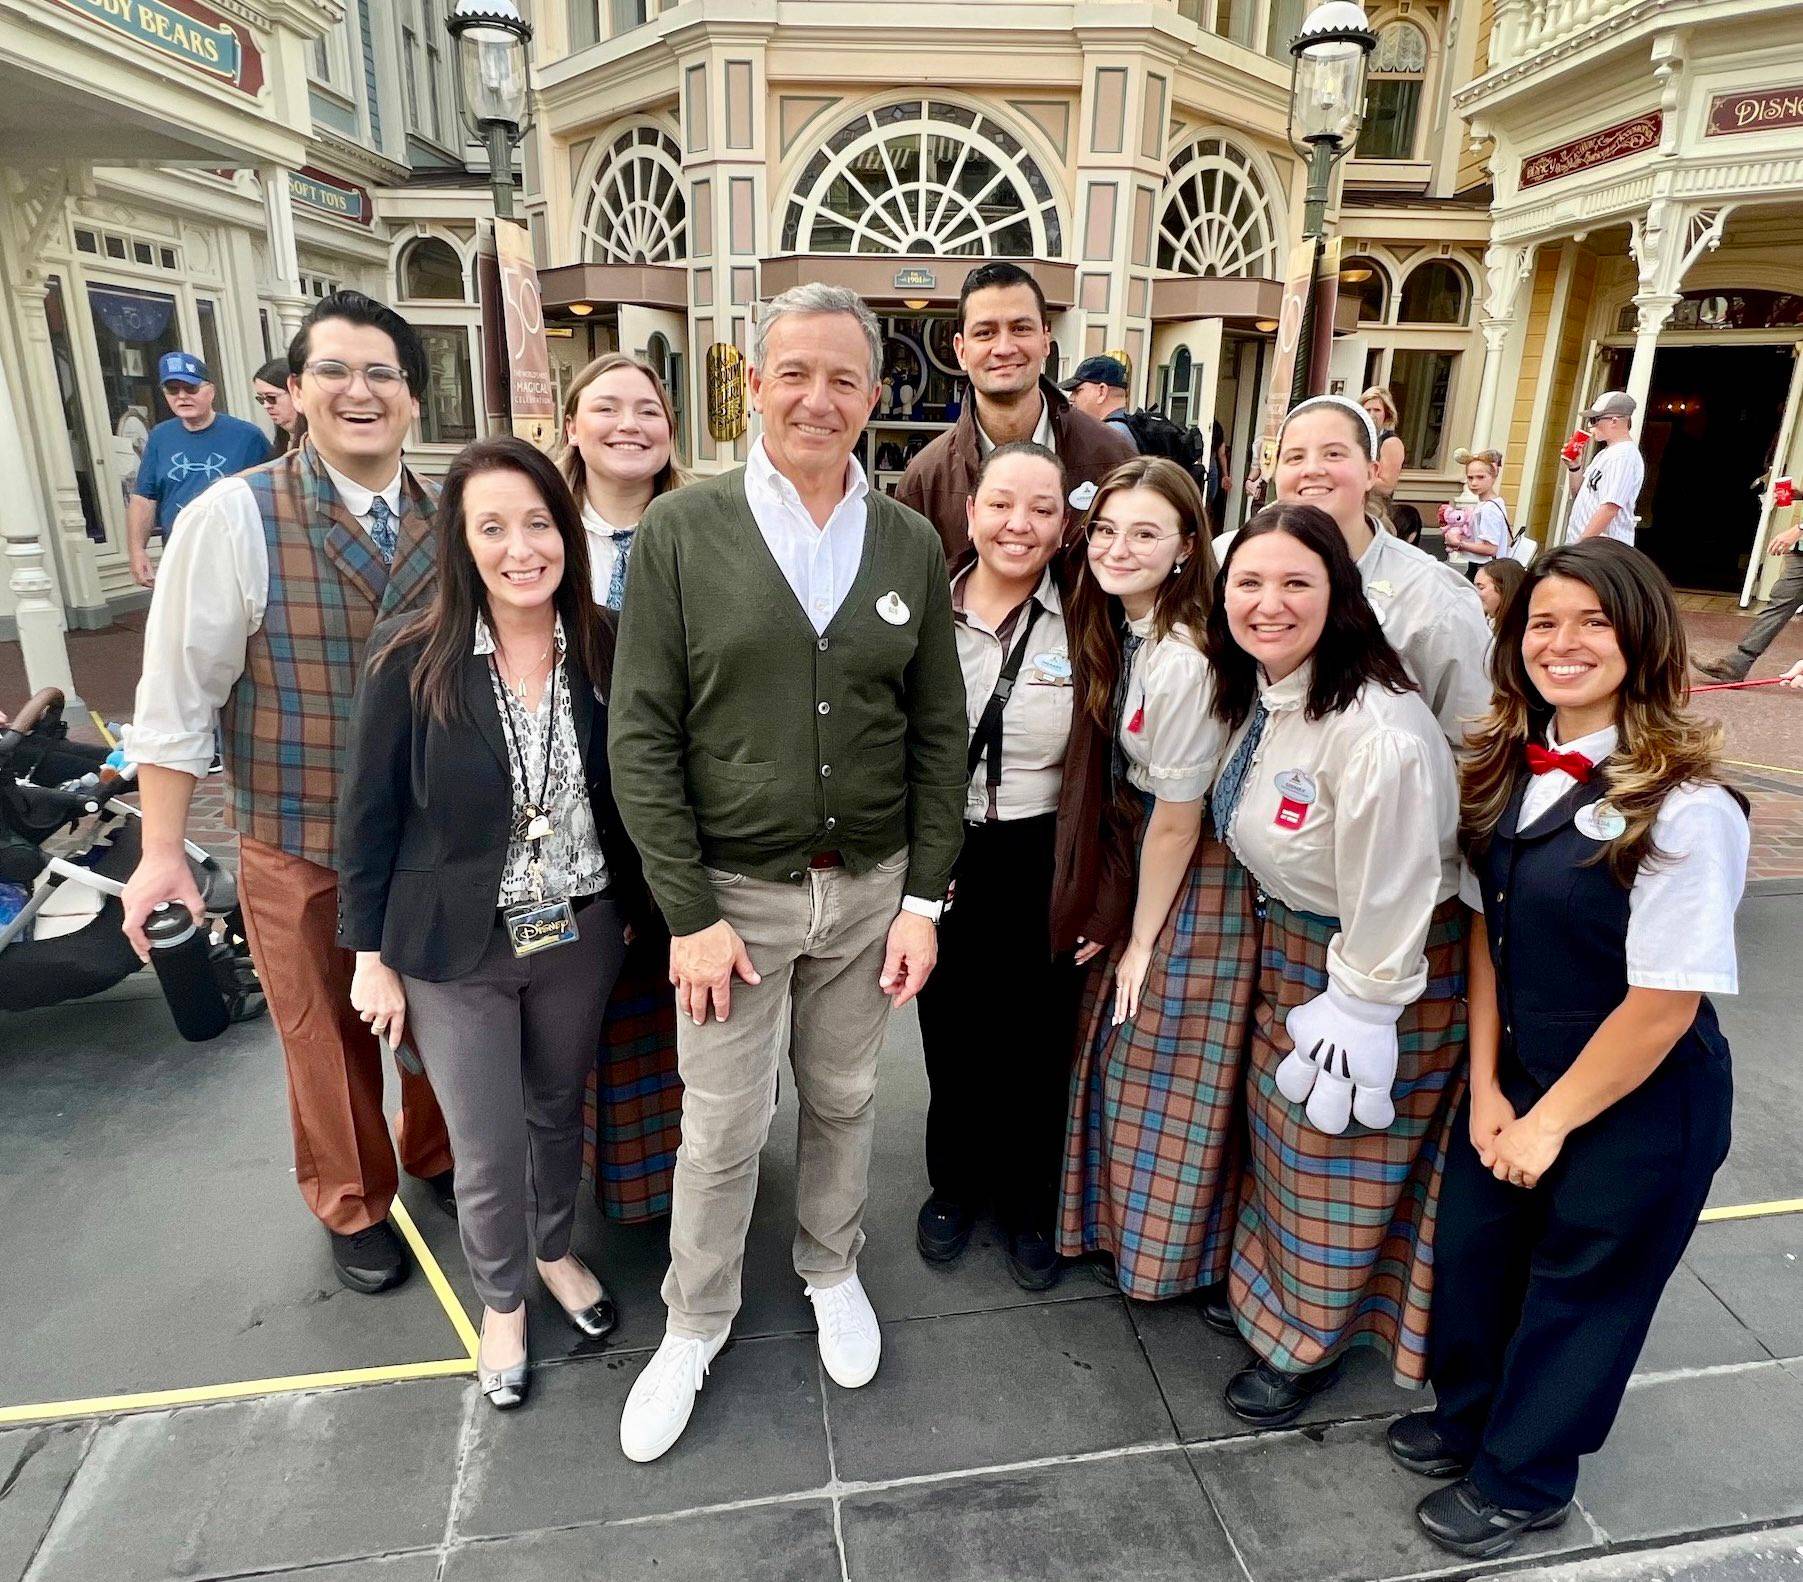 Bob Iger has just returned from Walt Disney World and will make his first earnings call appearance since 2020